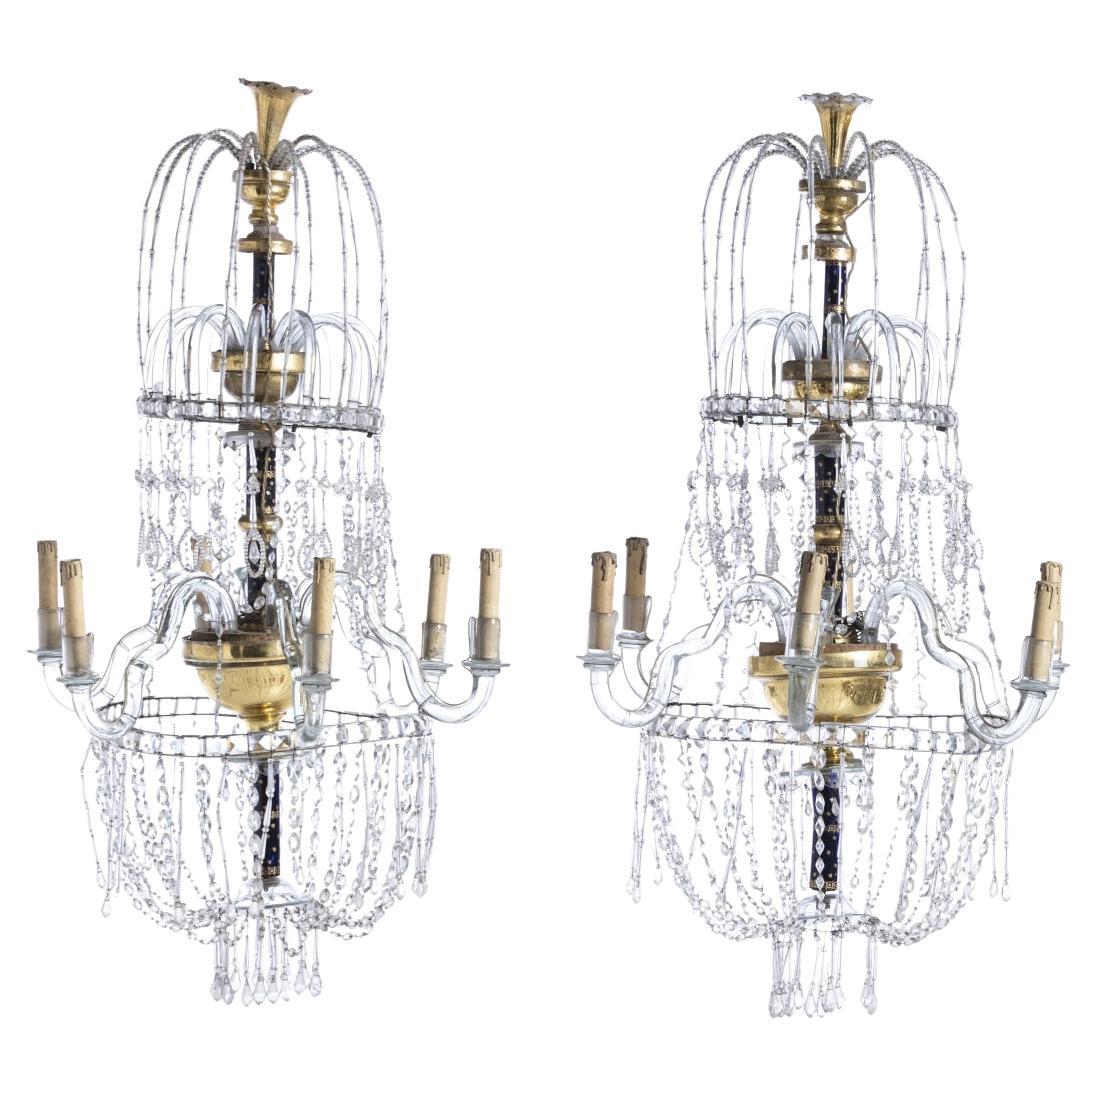 Rare Portuguese Pair of Bag Chandelier 18th Century For Sale